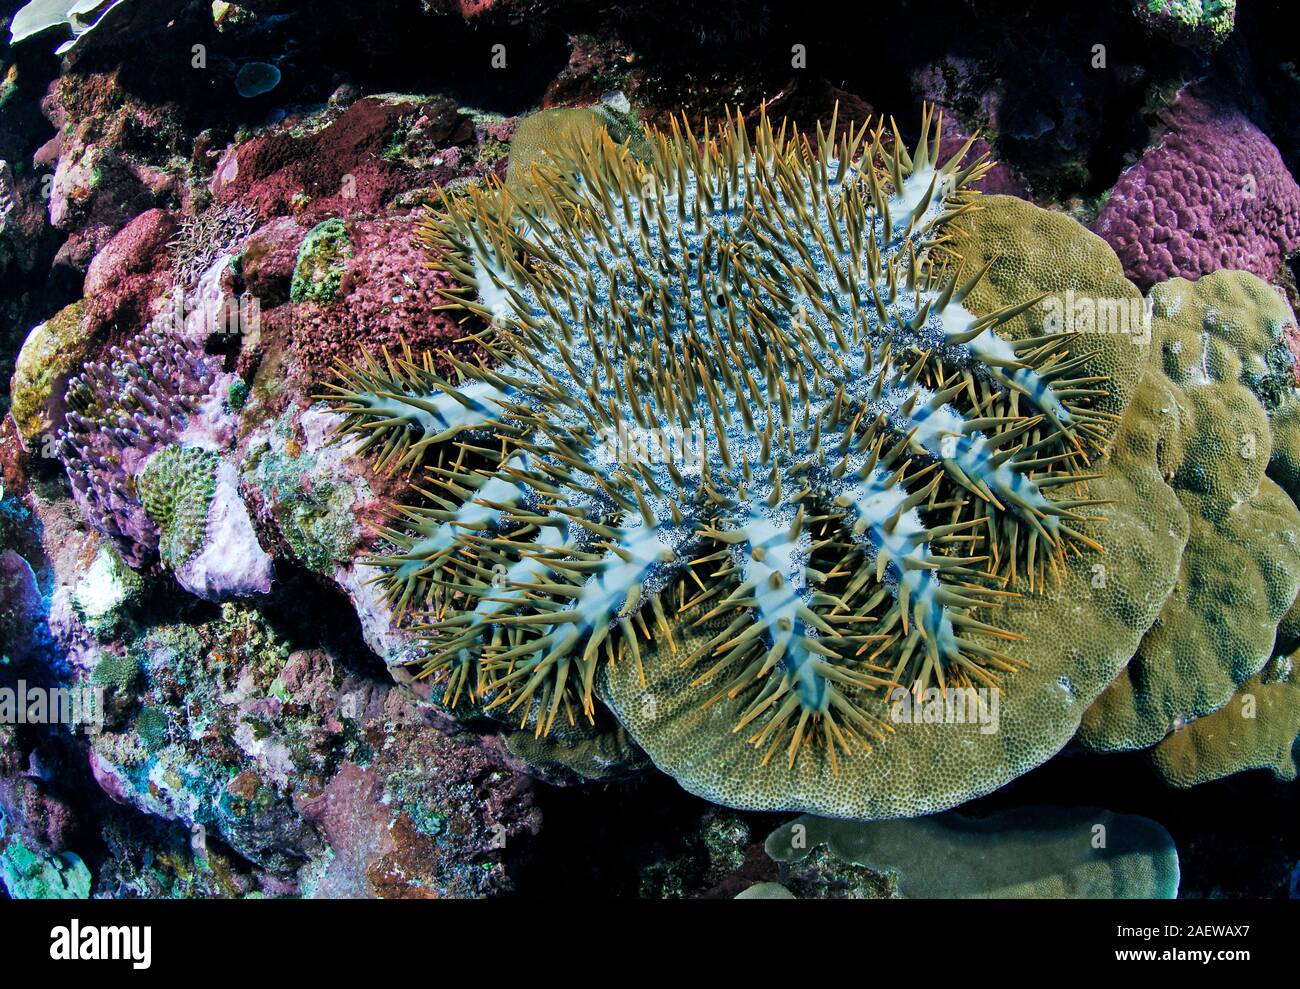 Crown of thorns starfish (Acanthaster planci) feeds polyps of a stone coral, Yap, Mikronesia Stock Photo